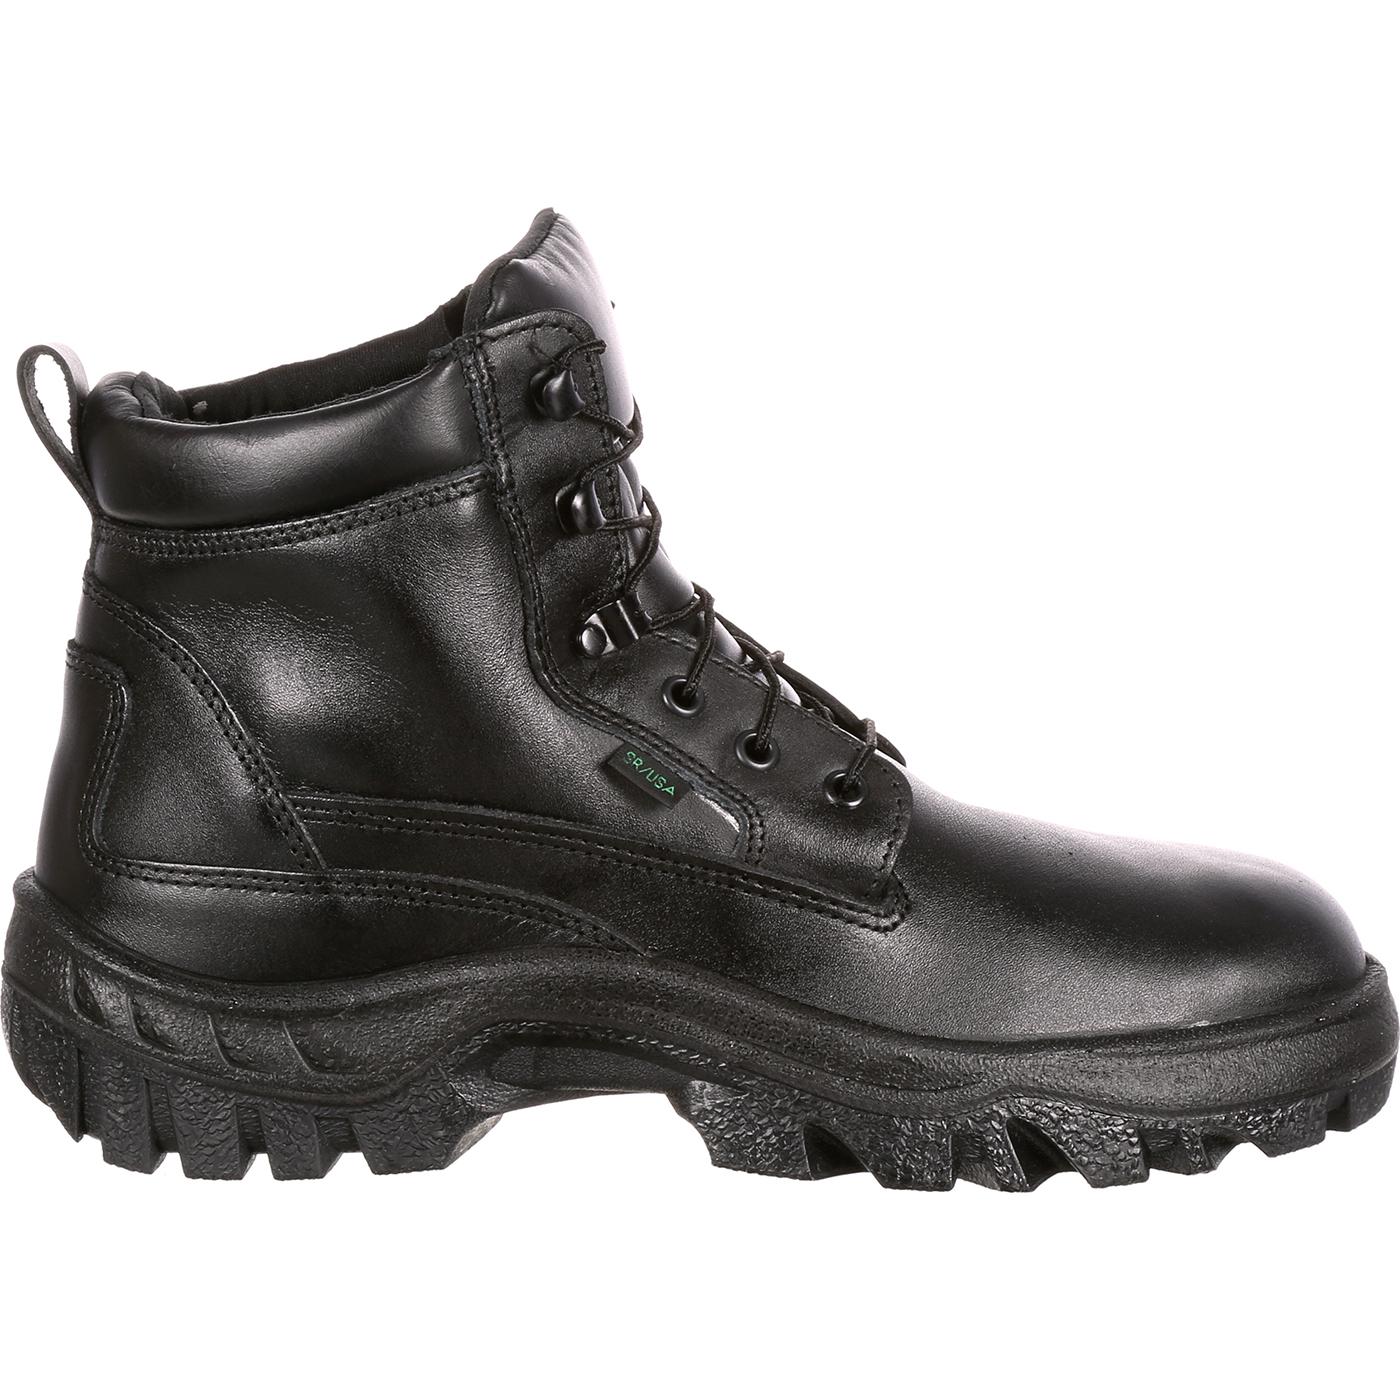 Rocky TMC Postal Approved Black Duty Boots - #FQ0005019